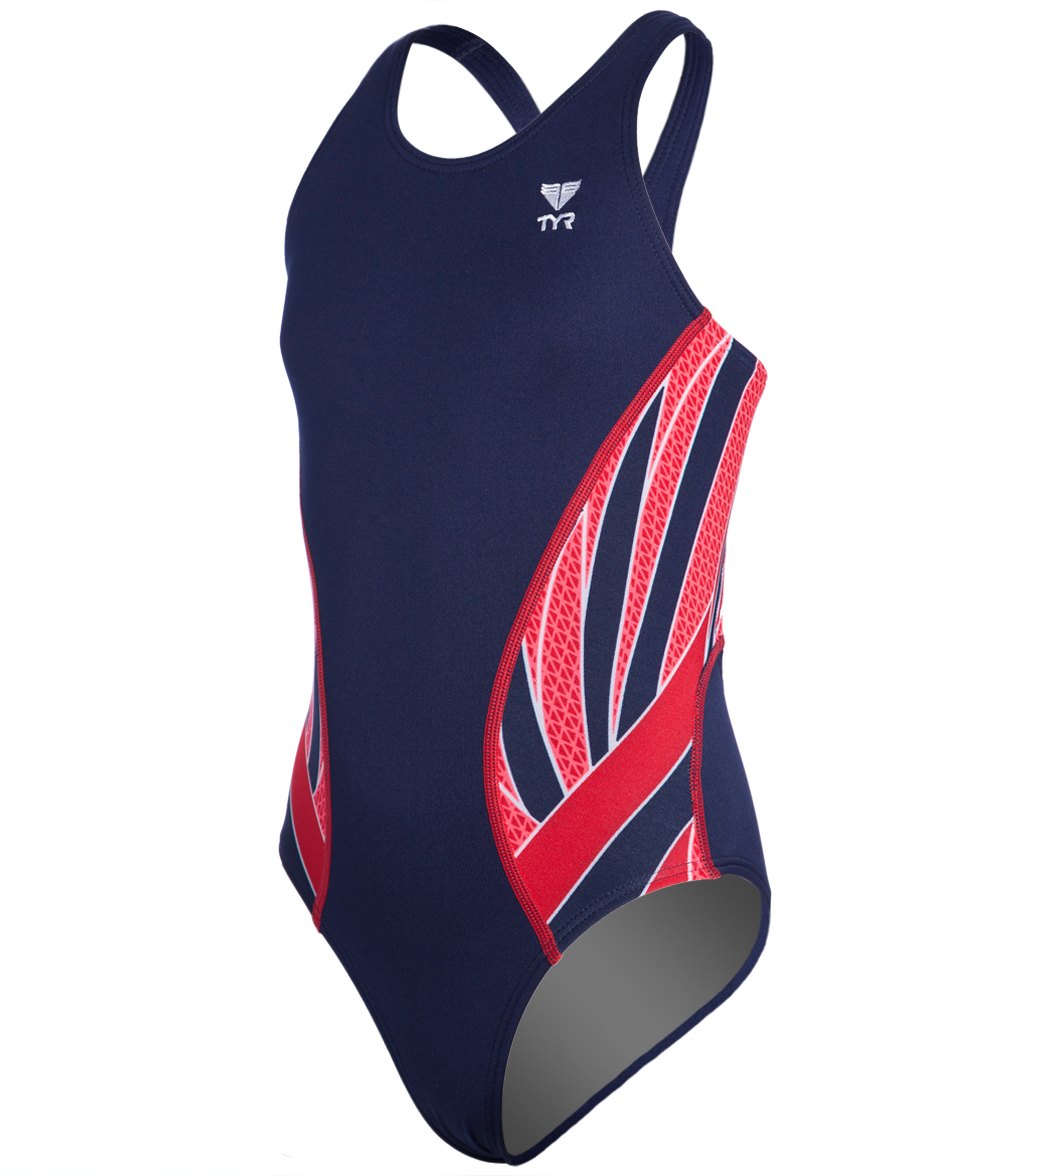 TYR Girls' Phoenix Maxfit One Piece Swimsuit - Navy/Red 24 Polyester/Spandex - Swimoutlet.com